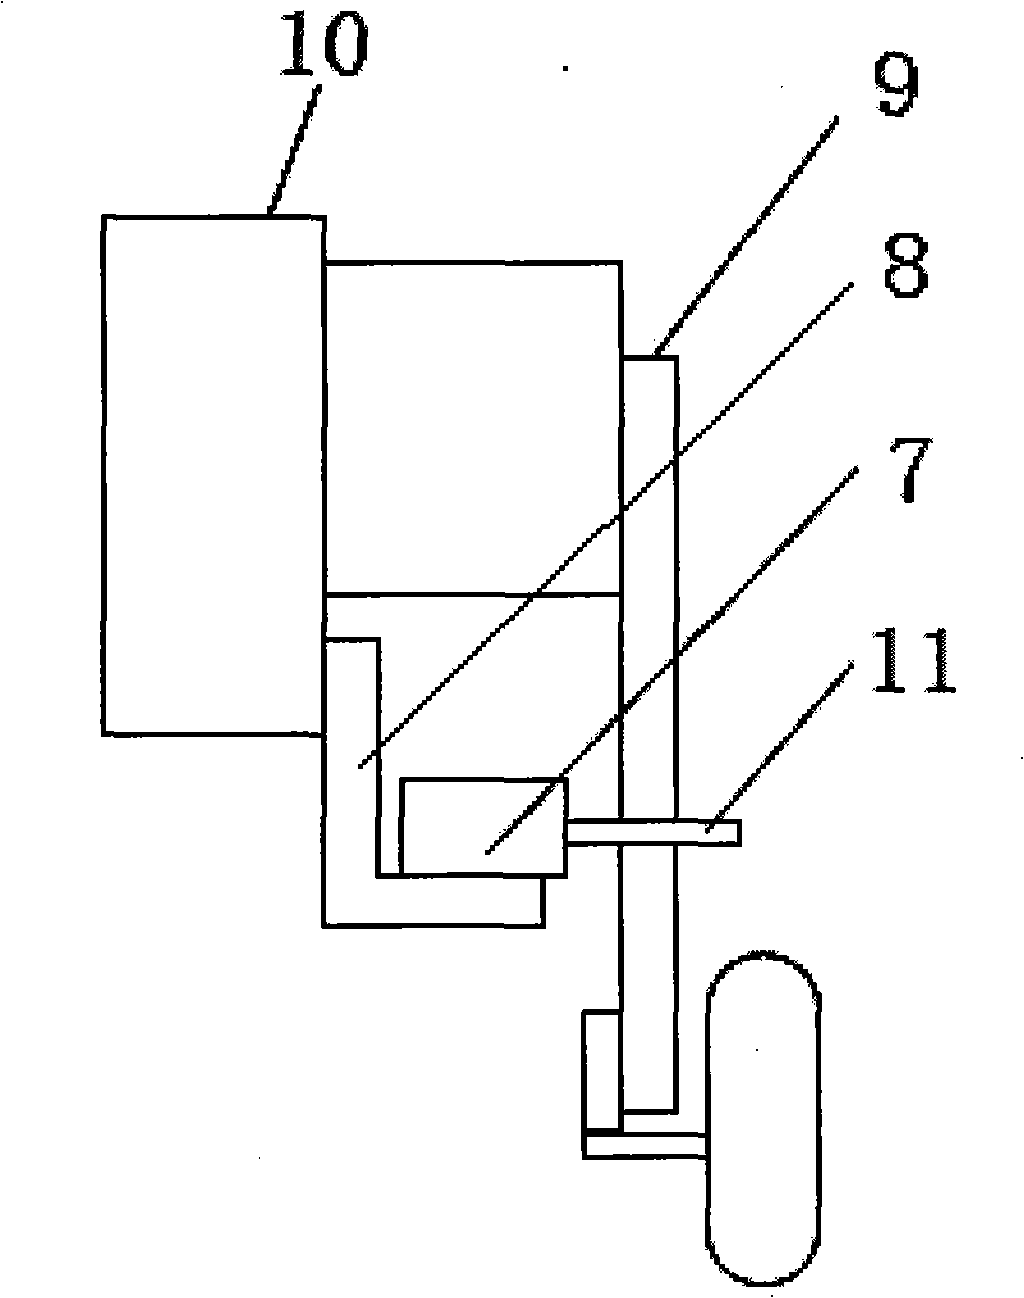 Automatic auxiliary lighting system for vehicle steering